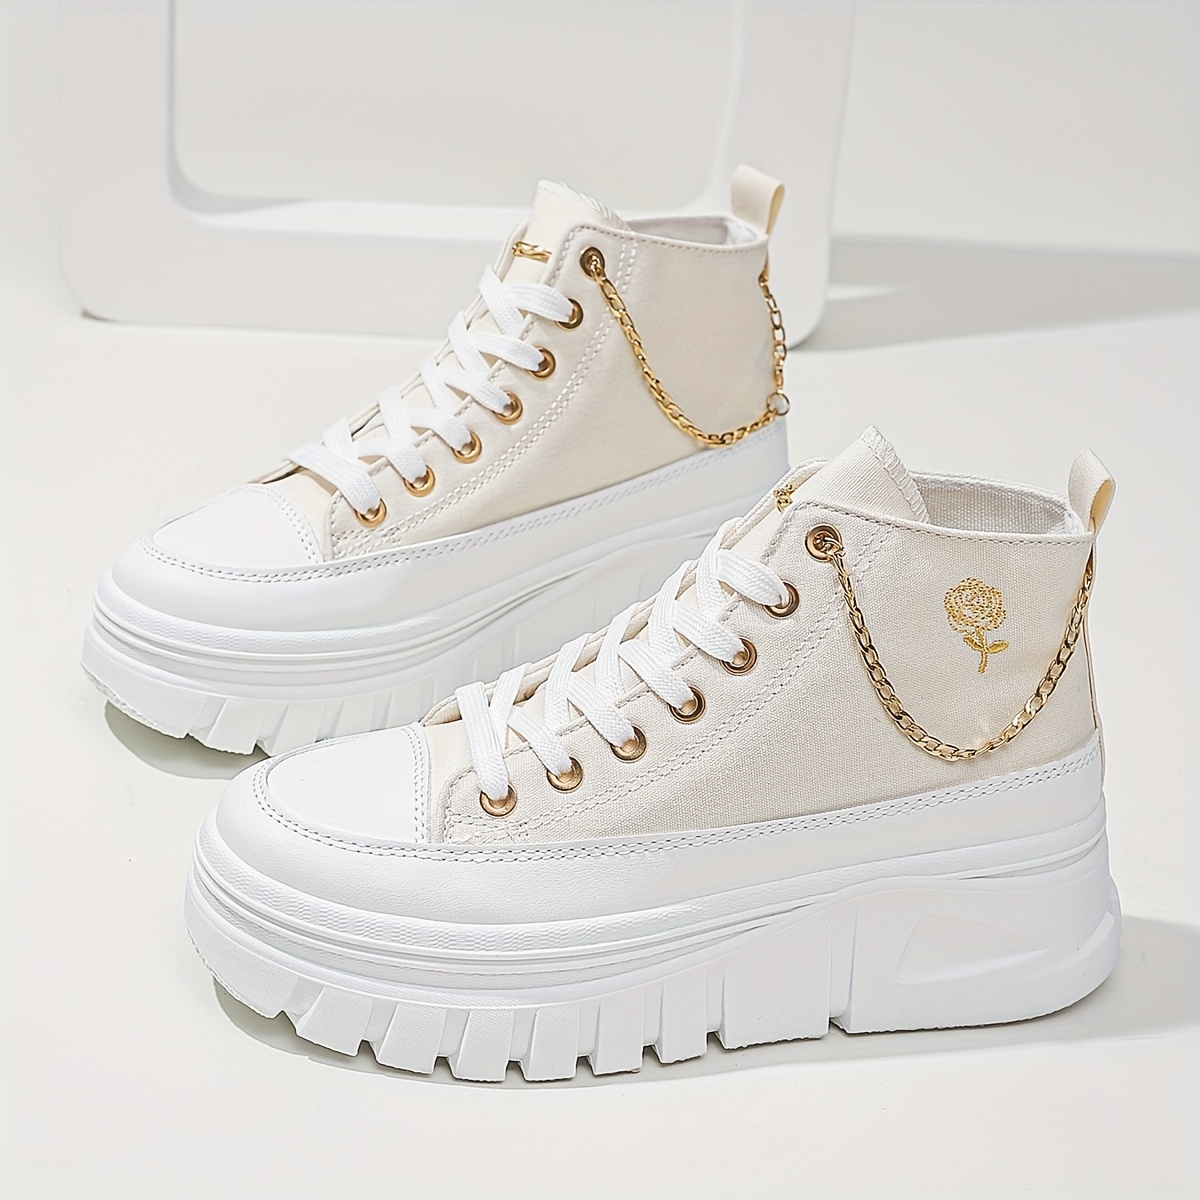 

Women's High-top Canvas Sneakers, Metallic Chain Platform Casual Sport Shoes, Increased Height Fashion Sneakers For Walking